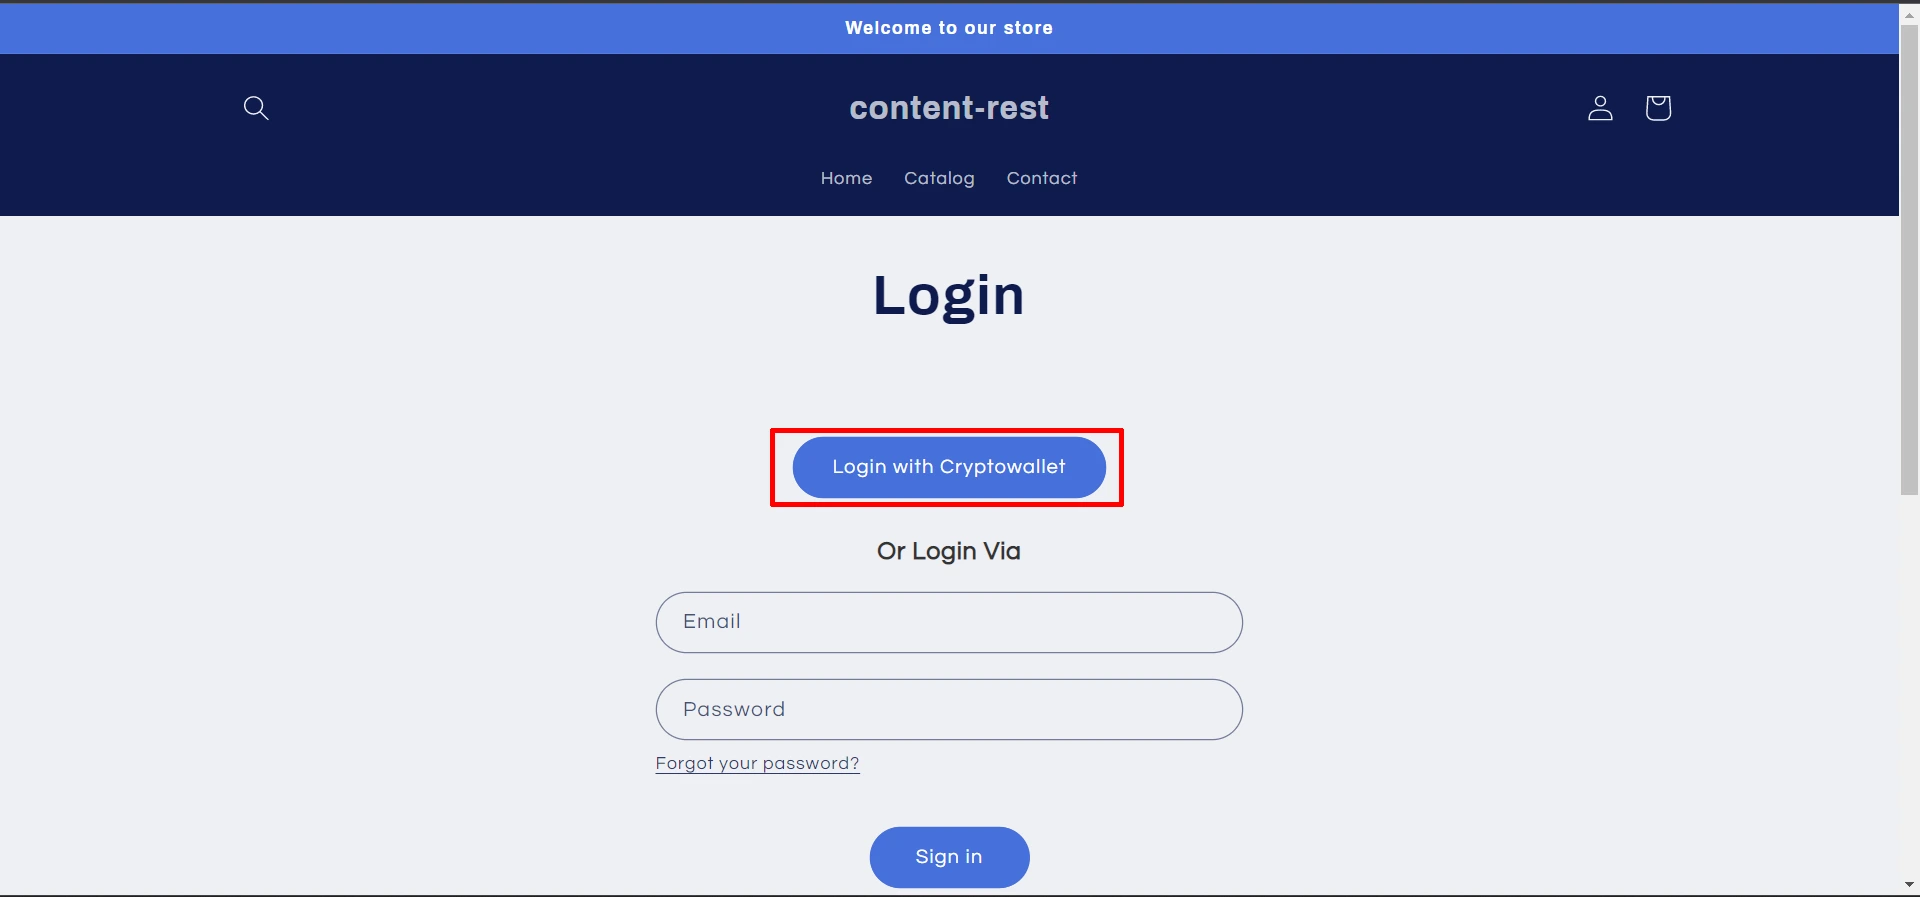 shopify content restriction application - install app